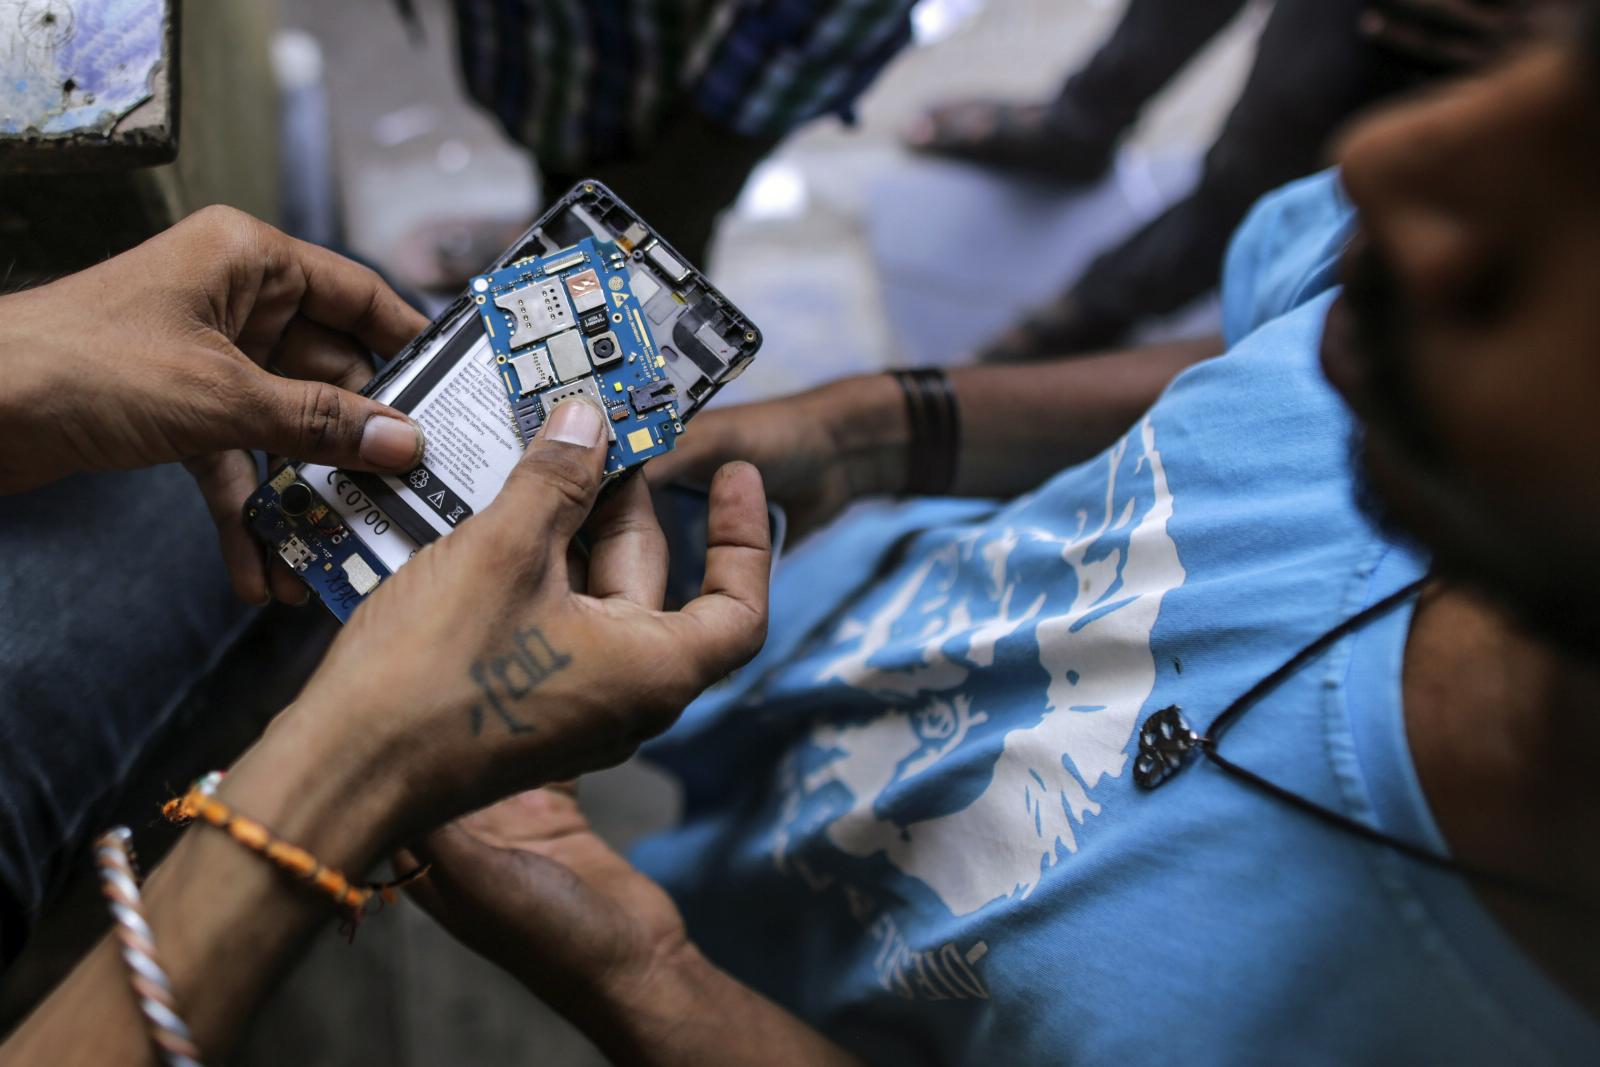 India kicks off a pilot to become electronics repair capital of the world